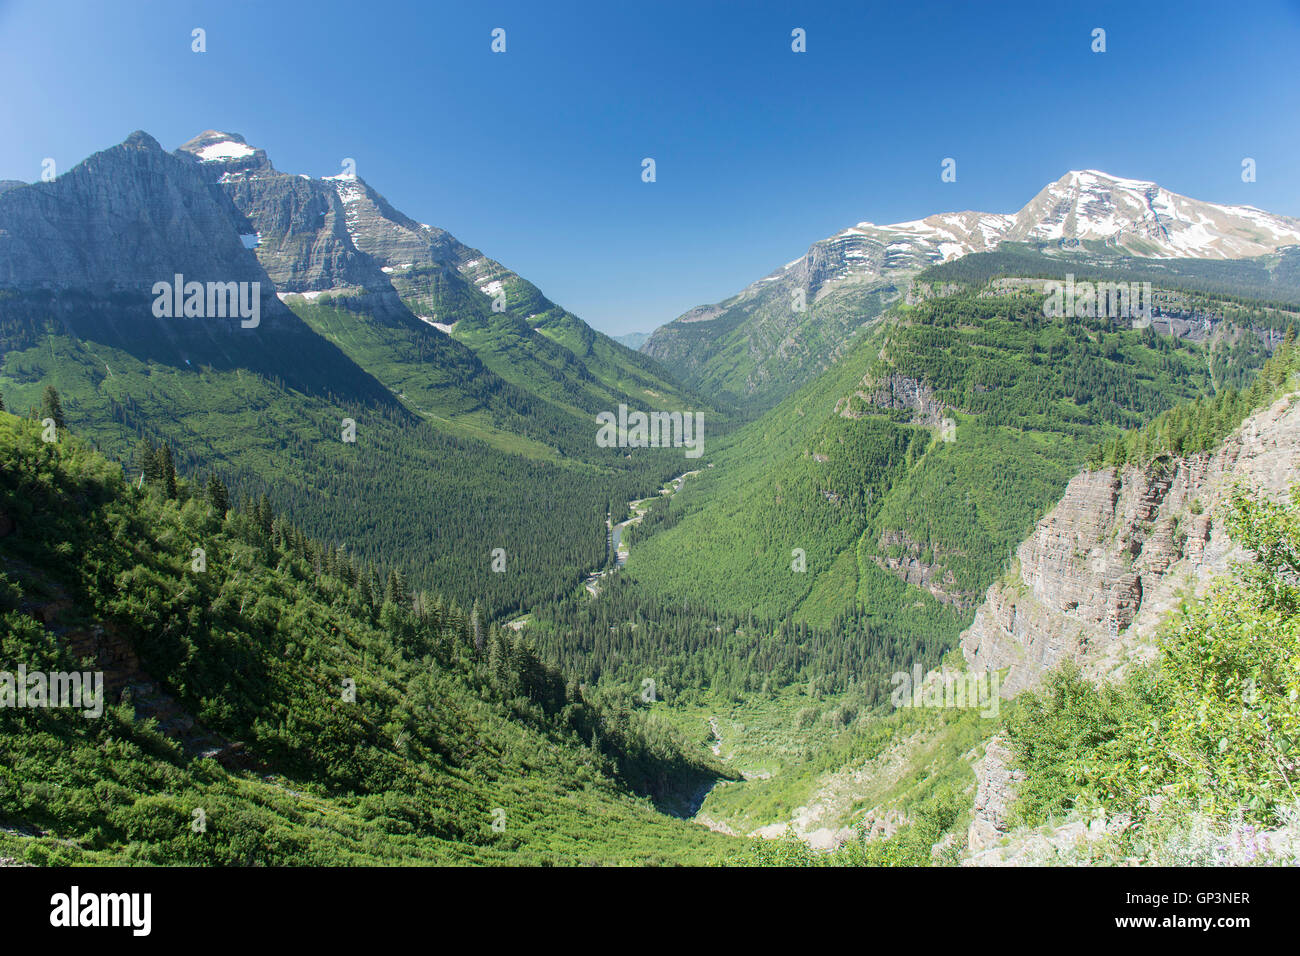 An overlook showing a mountain valley on Going-to-the-sun road in Glacier National Park, Montana, United States. Stock Photo